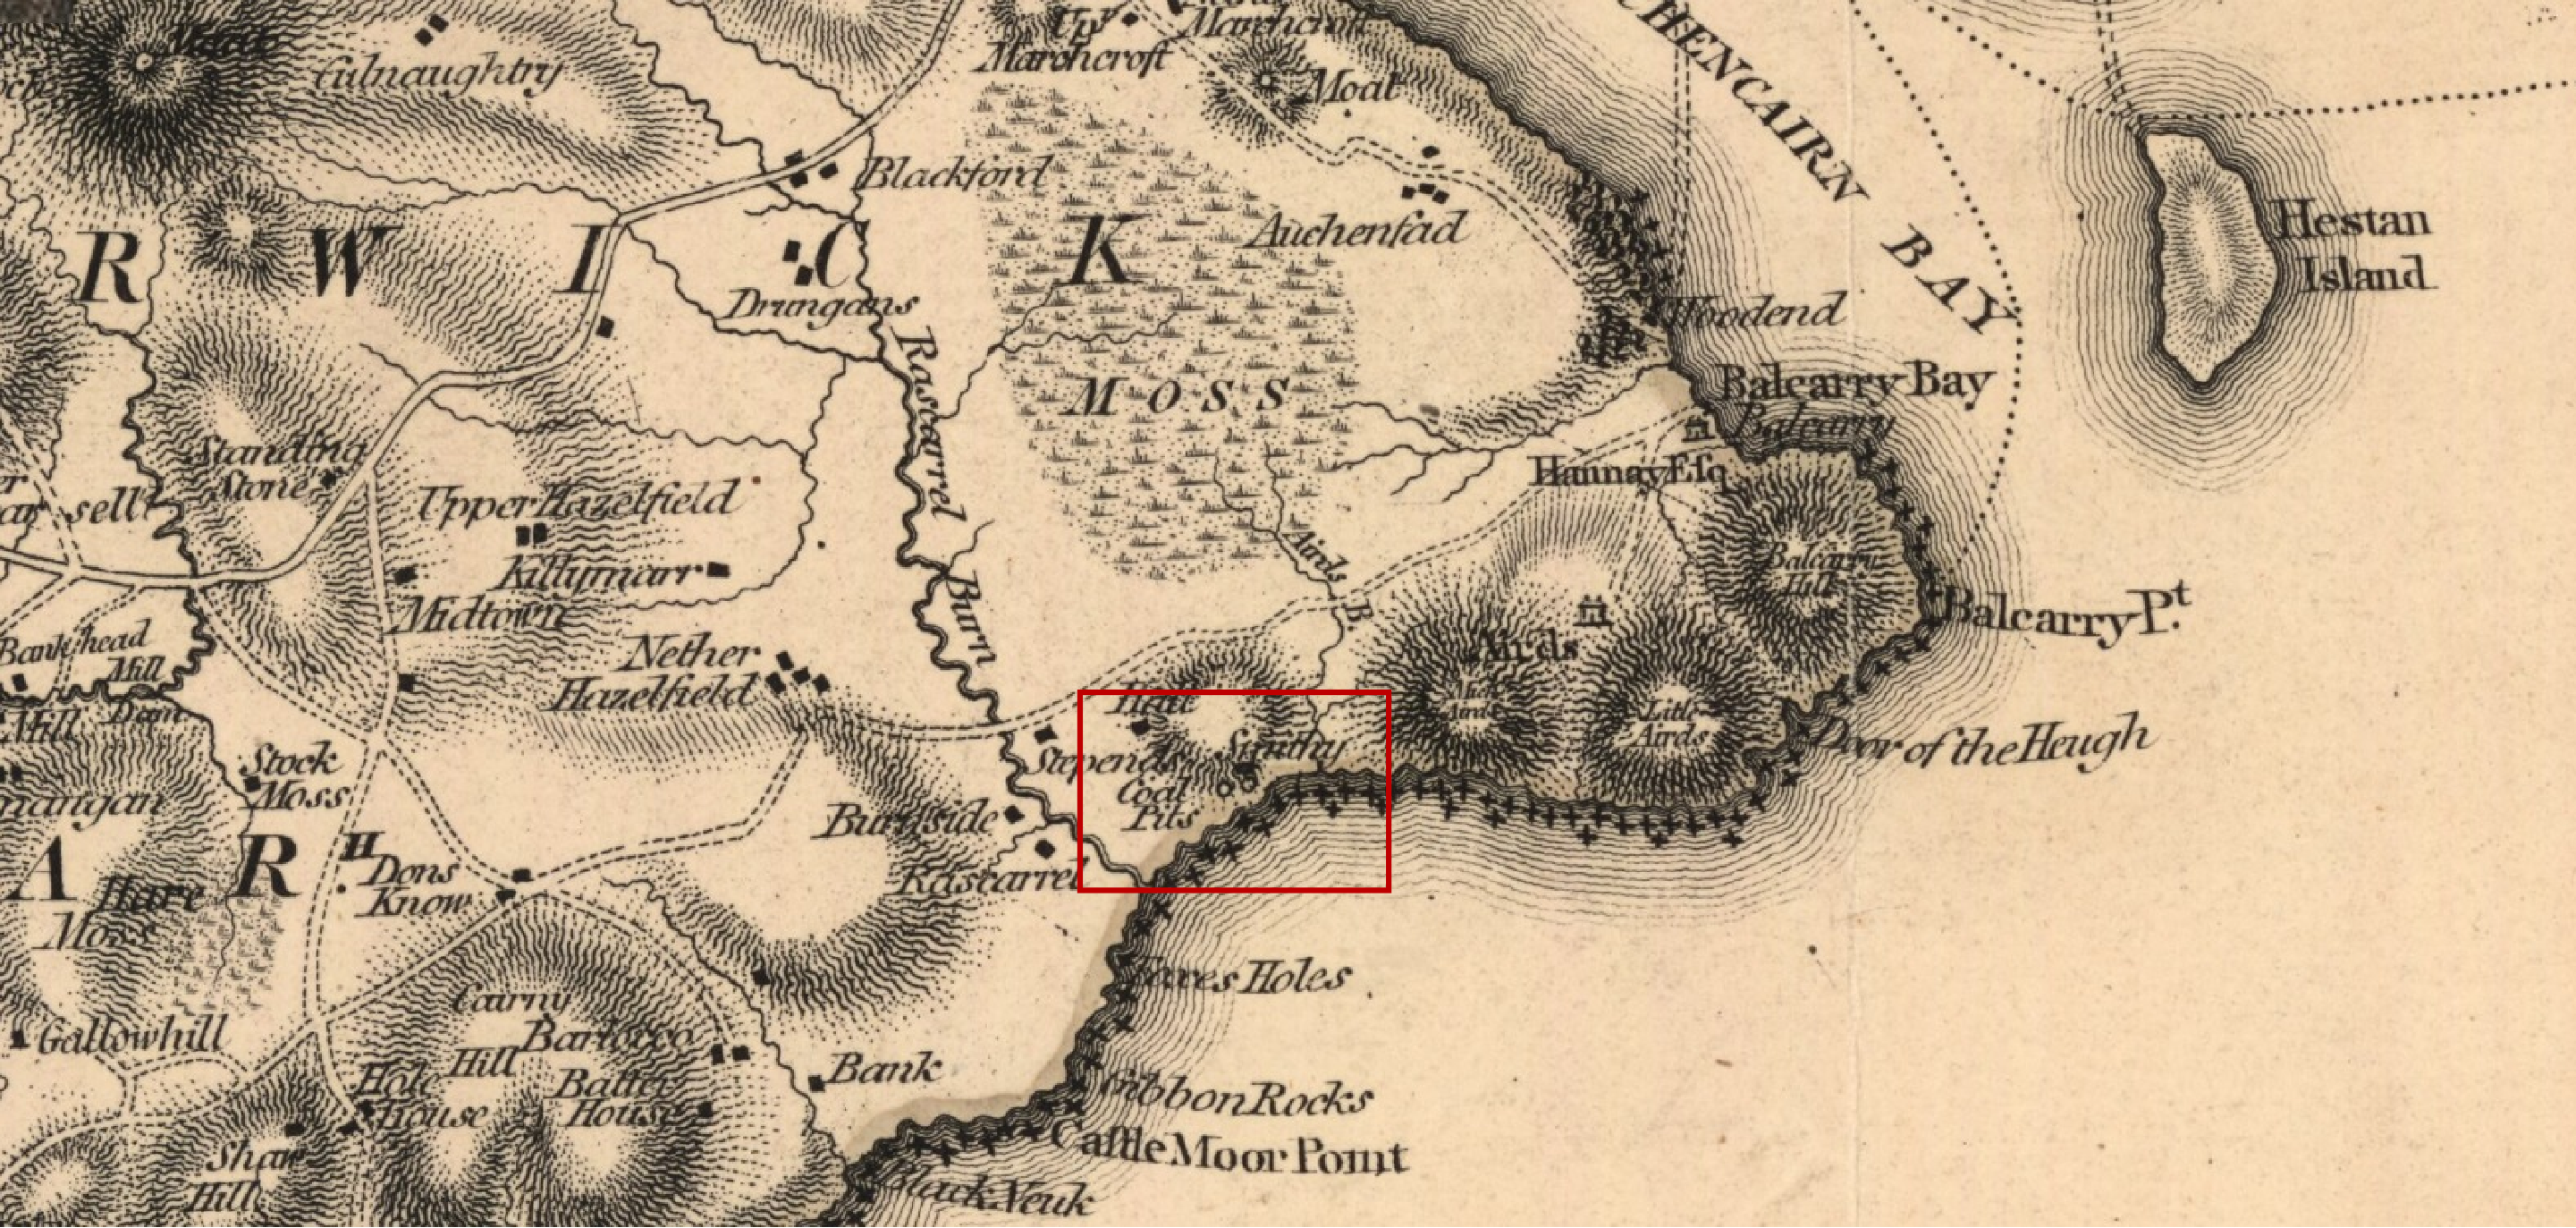 A historic map of the Auchencairn coast showing coal pits and a smithy labelled between the Rascarrel Burn and the Airds Burn, highlighted with a red box around the area of interest